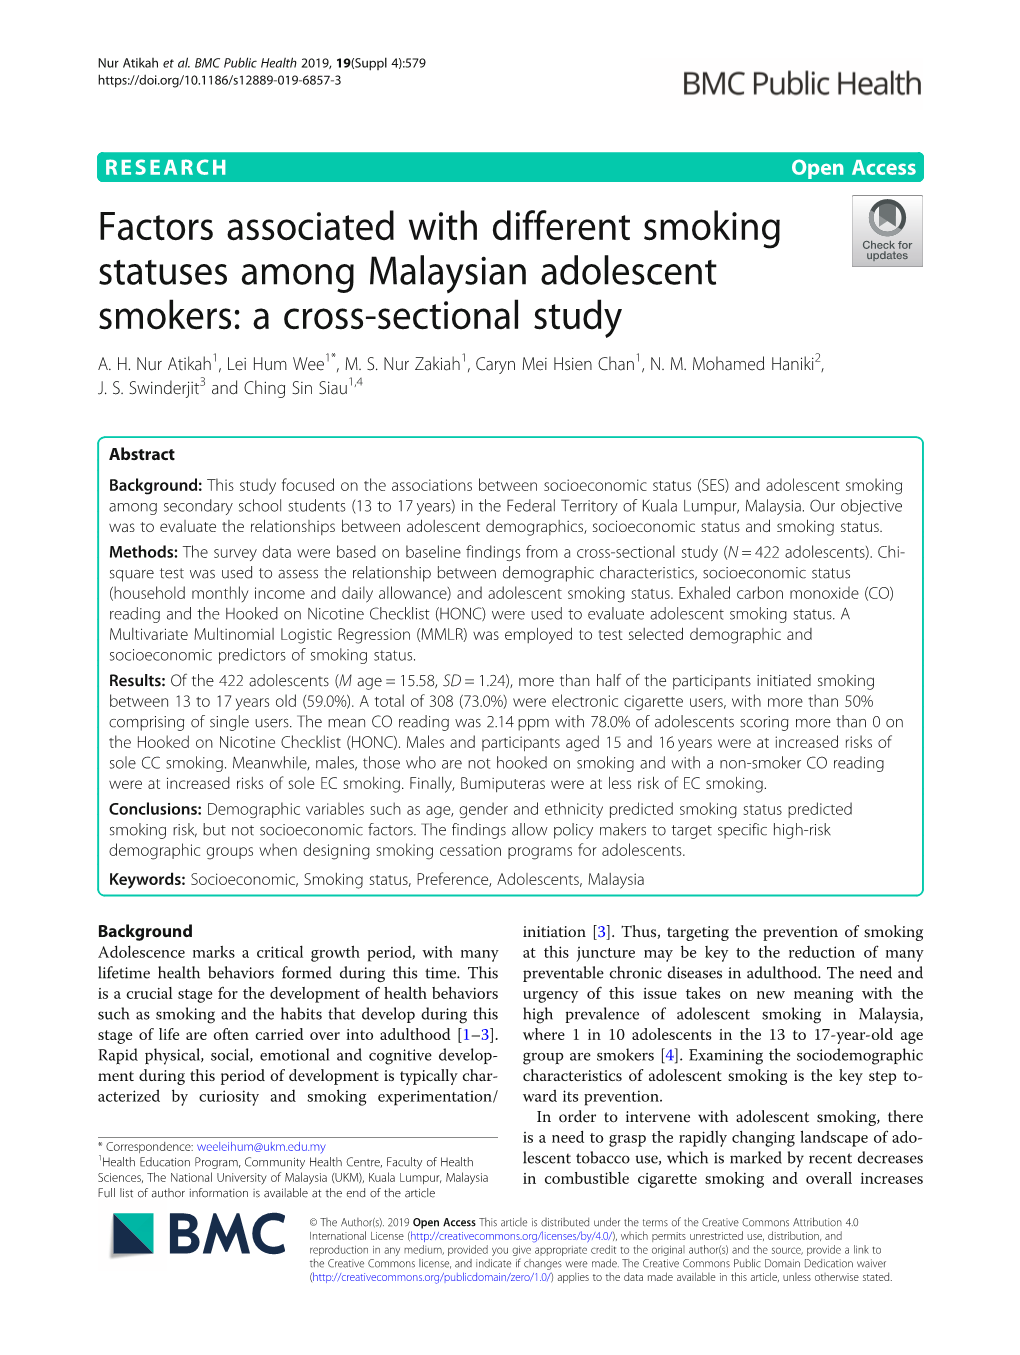 View of Smoking Research in Malaysia